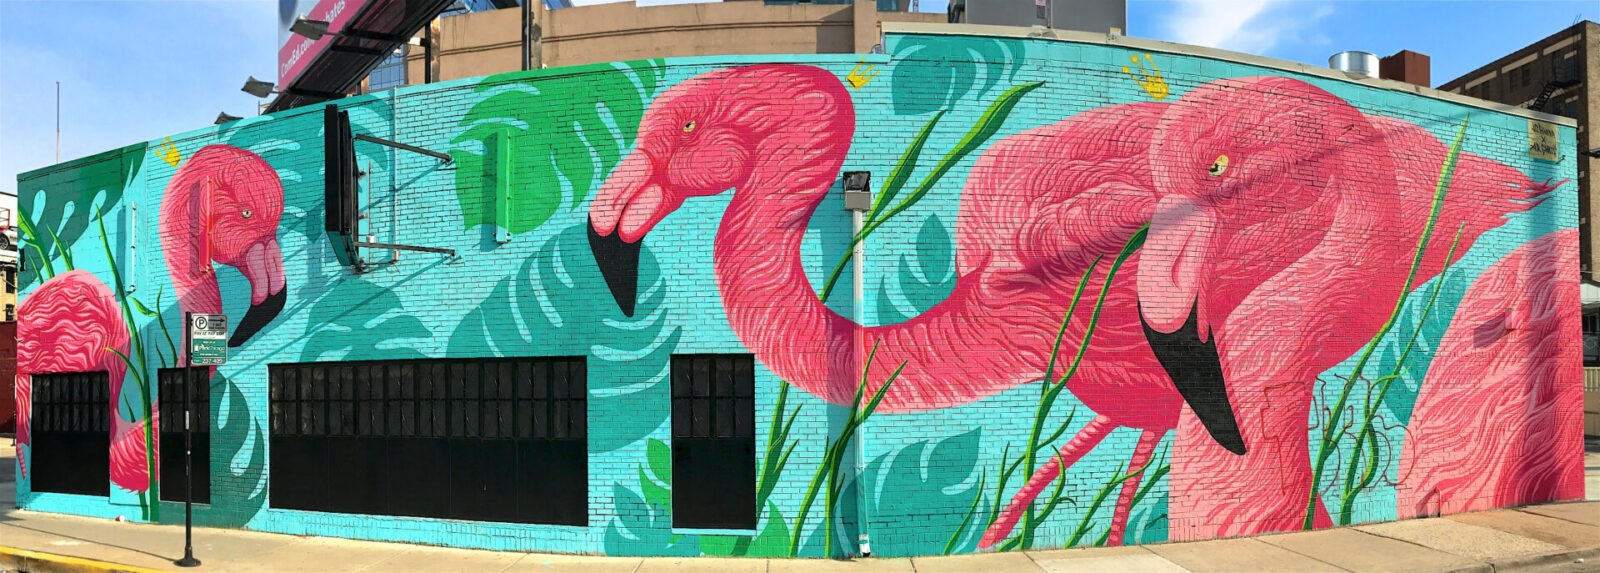 Pink Flamingo Mural in Chicago Illinois